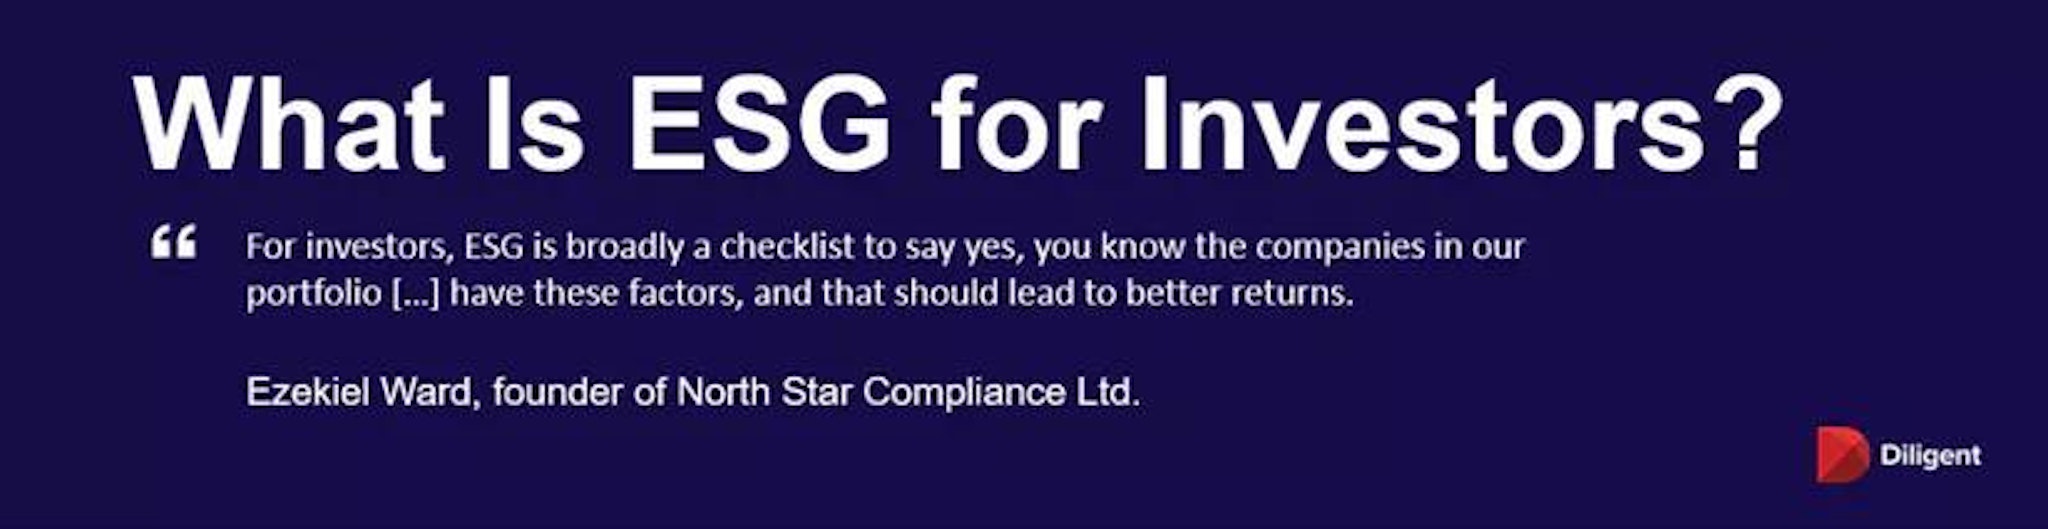 For investors, ESG is broadly a checklist to say yes, you know the companies in our portfolio […] have these factors, and that should lead to better returns. - Quote from Ezekiel Ward, the founder of North Star Compliance Limited